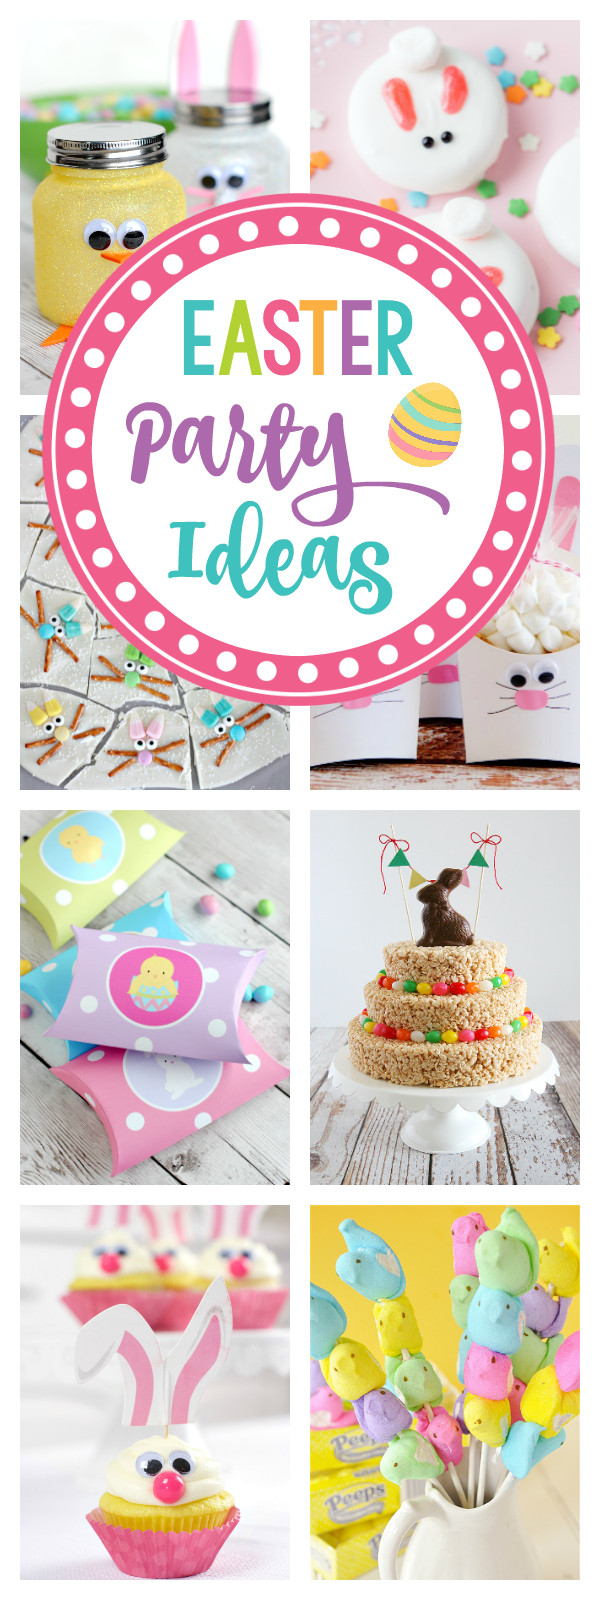 Toddler Easter Party Ideas
 25 Fun Easter Party Ideas for Kids – Fun Squared